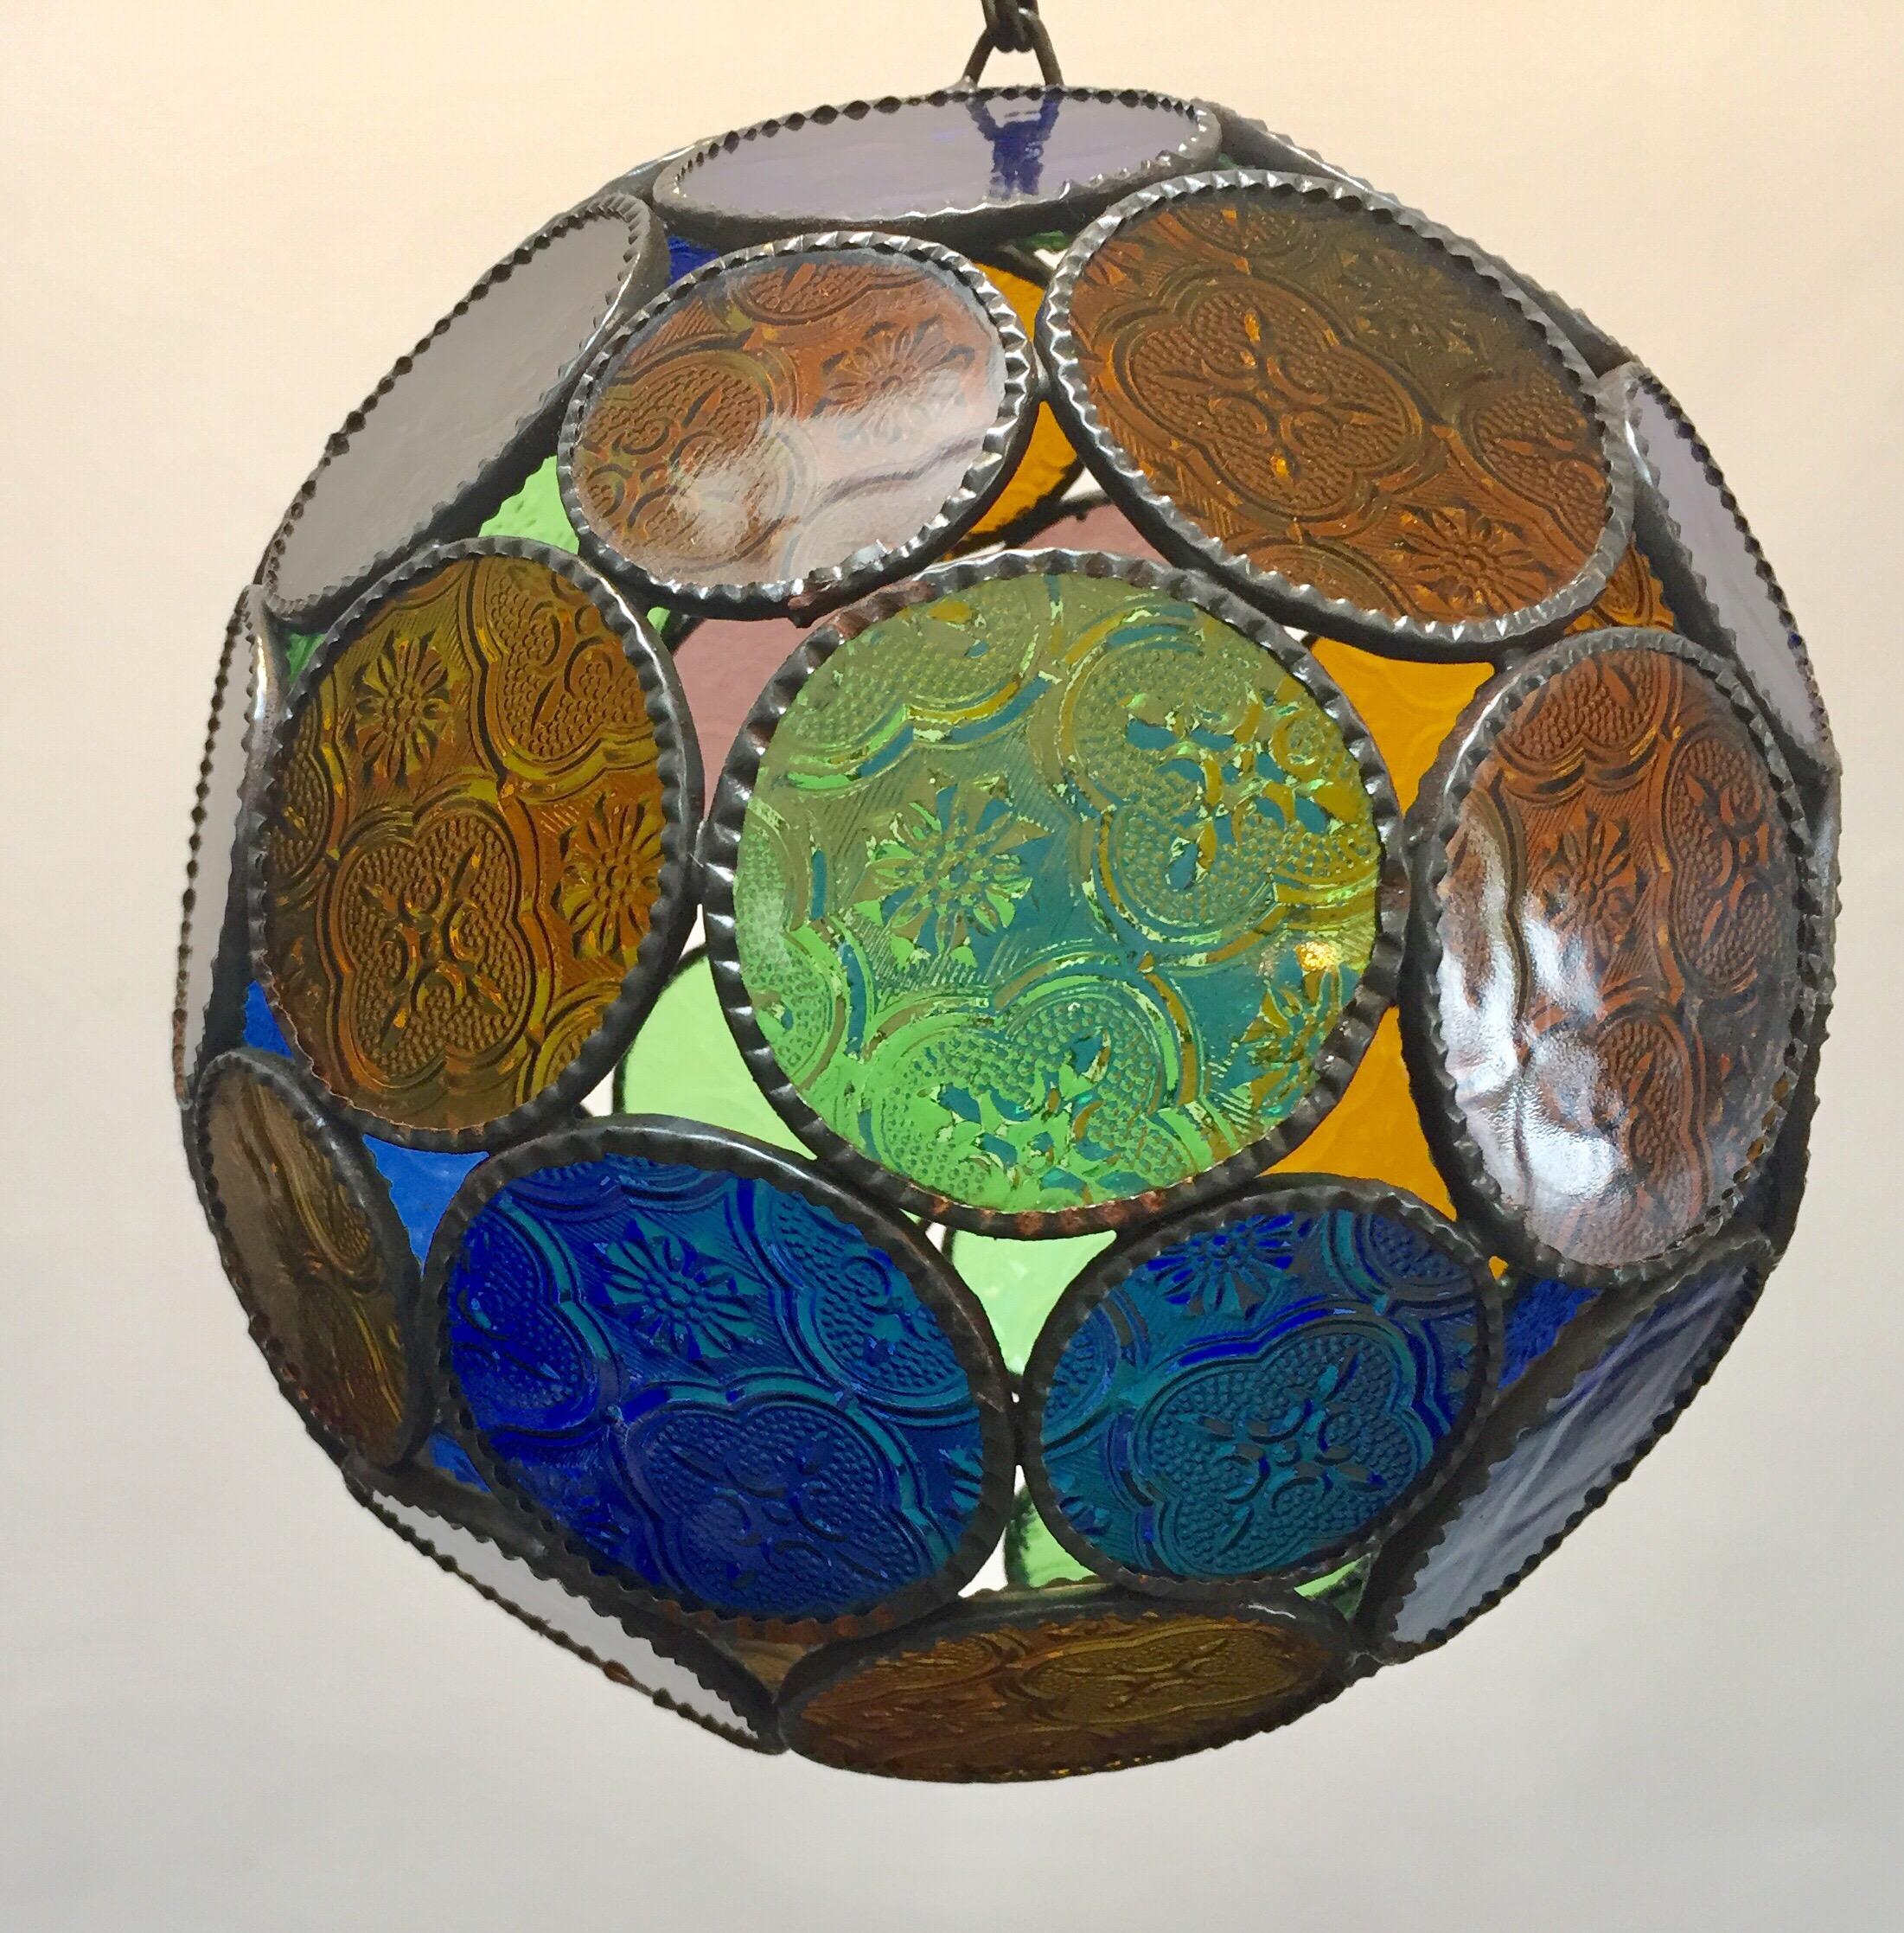 Hand-Crafted Handcrafted Moroccan Moorish Glass Orb Lantern with Multi-Color Glass For Sale